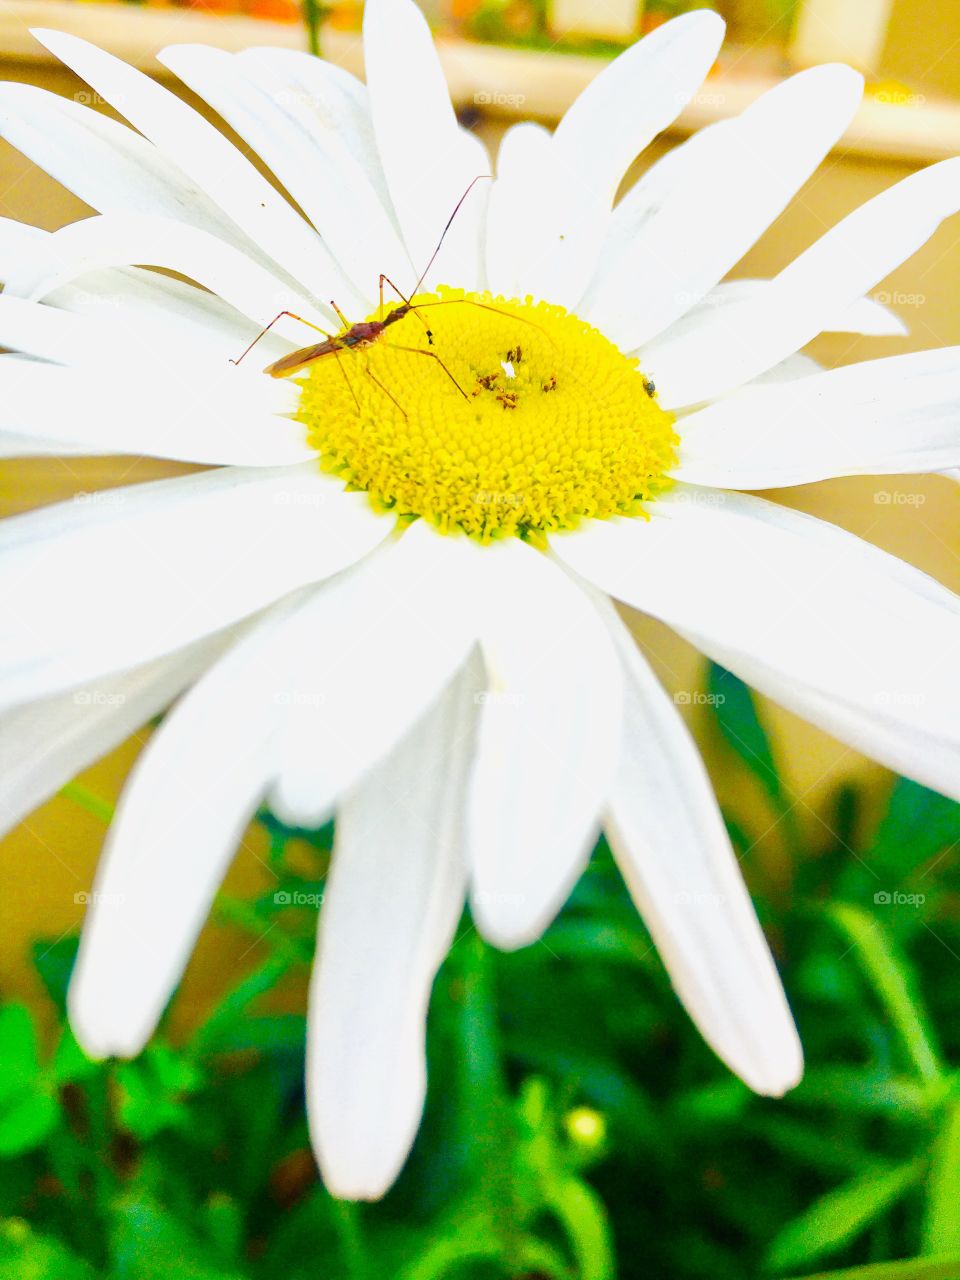 A daisy kissed by an ant